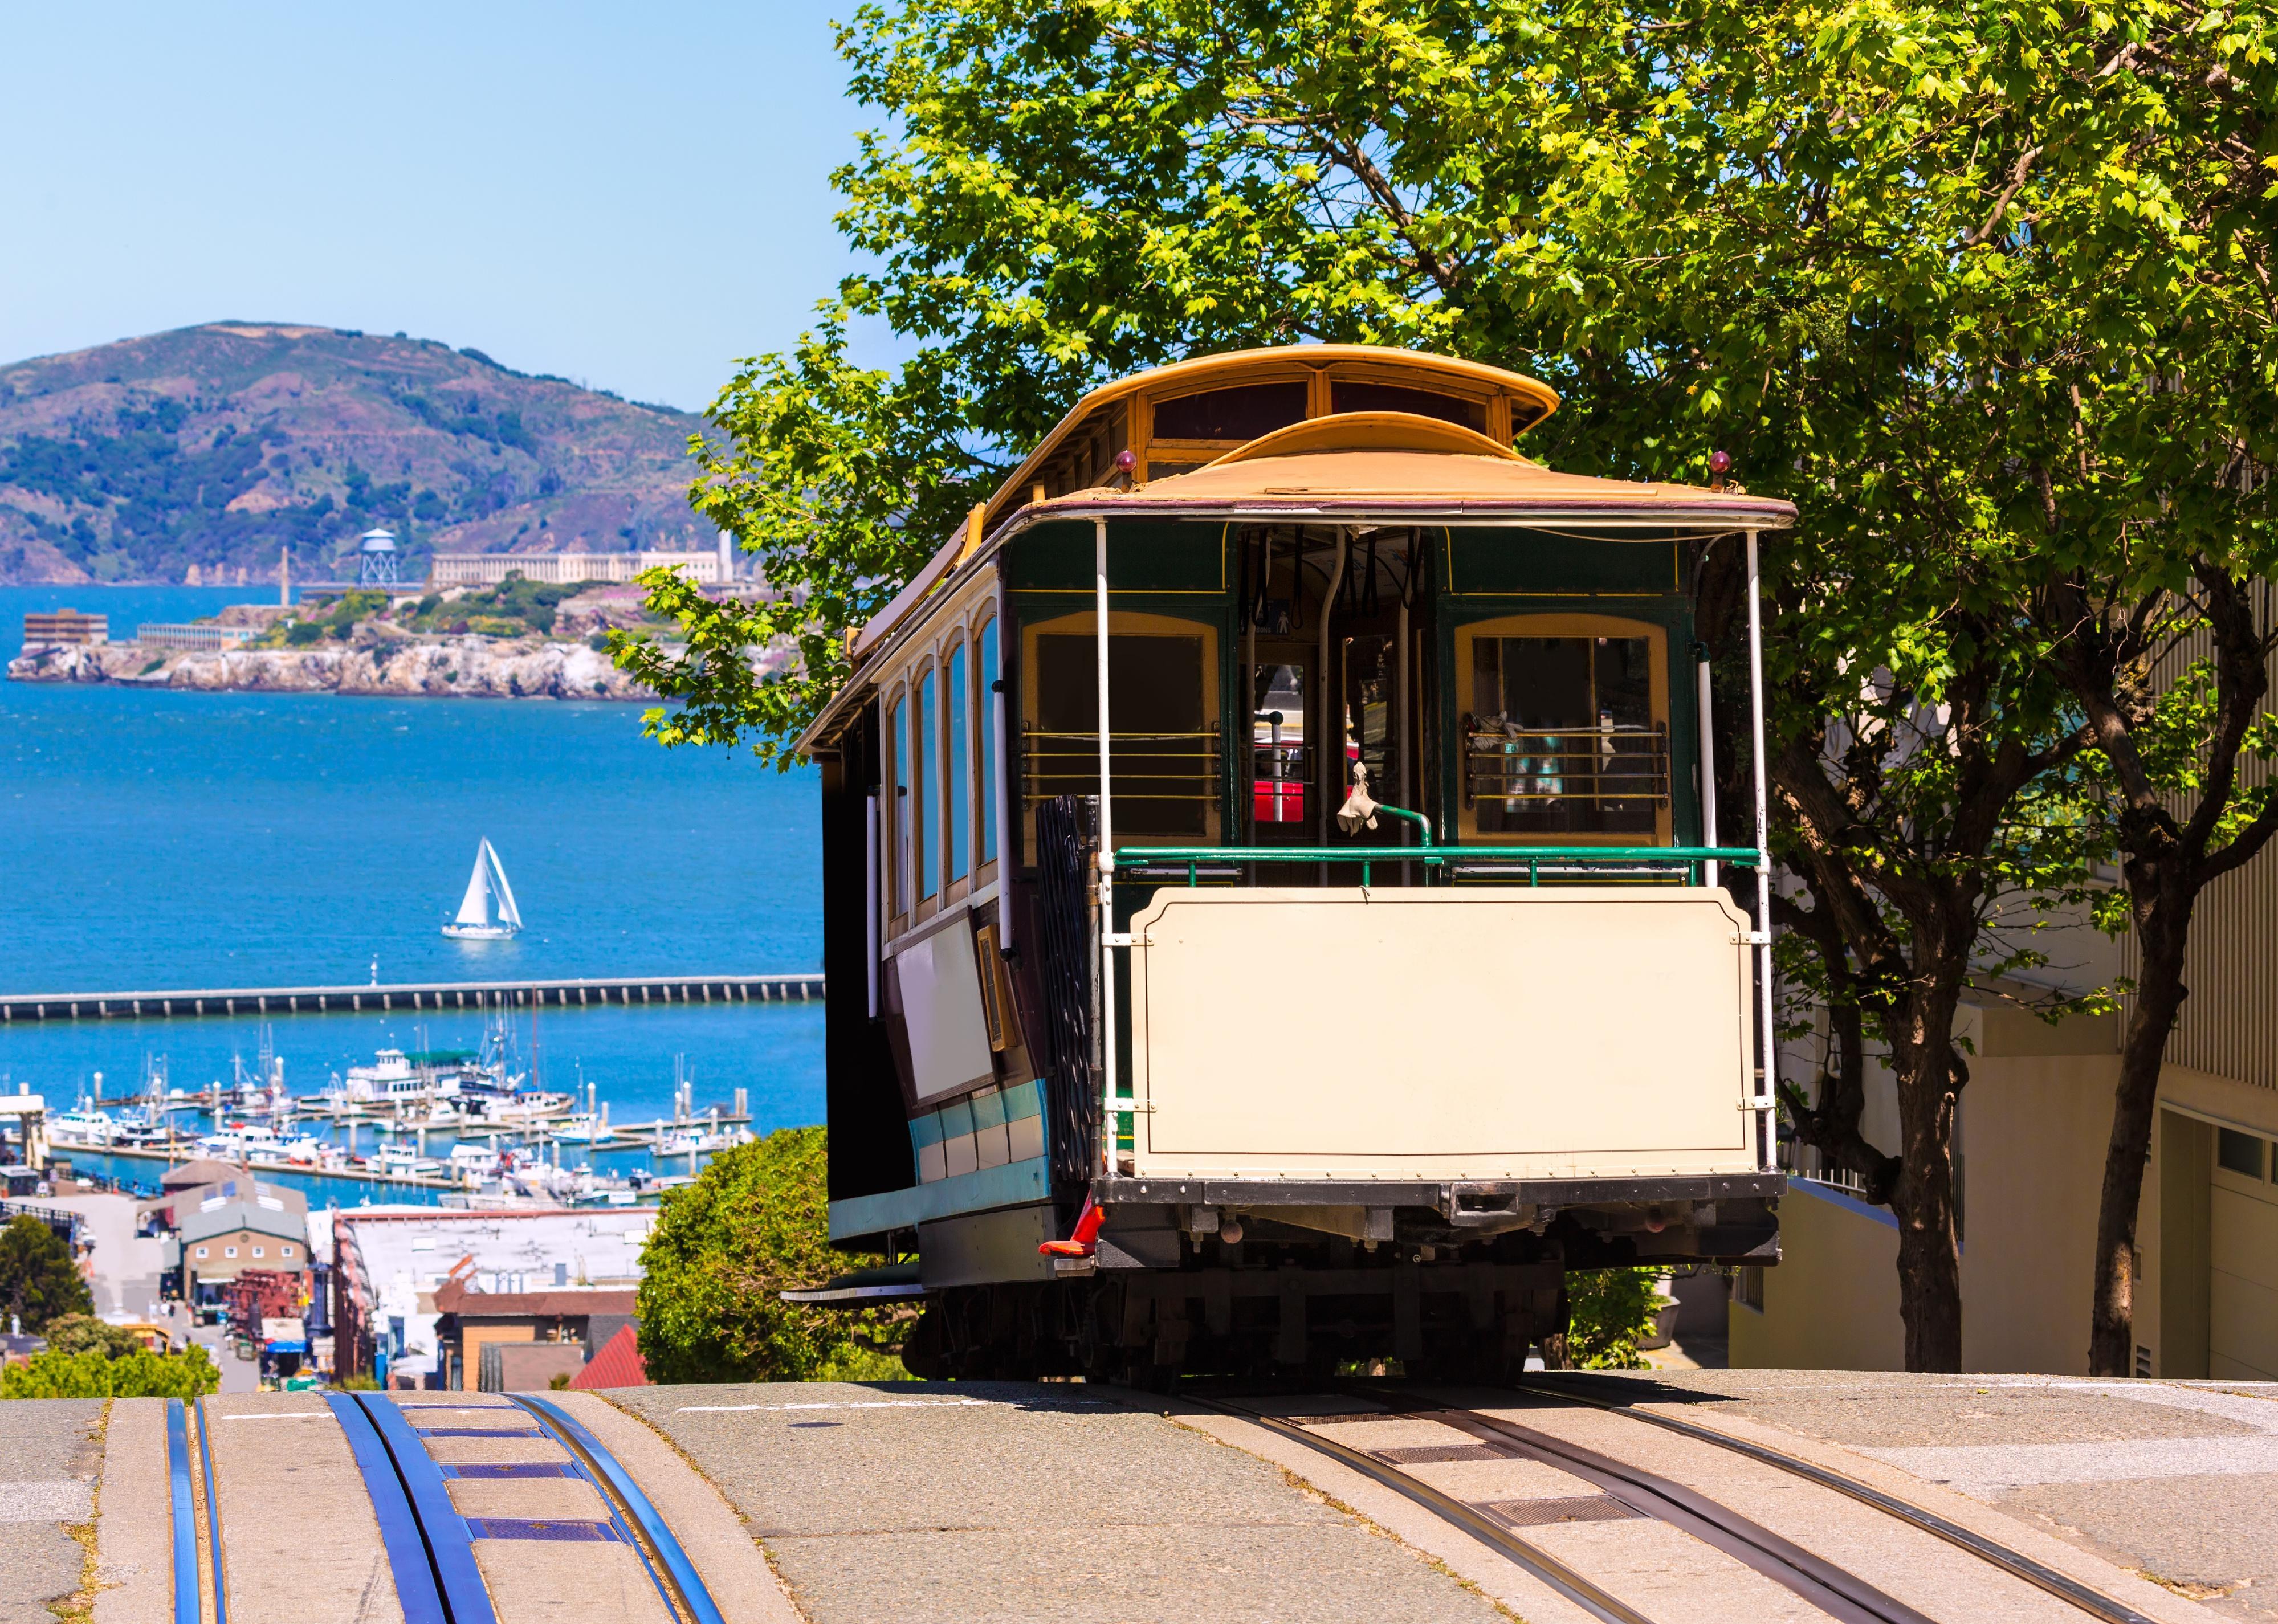 An iconic cable car reaches the top of a hill in San Francisco.